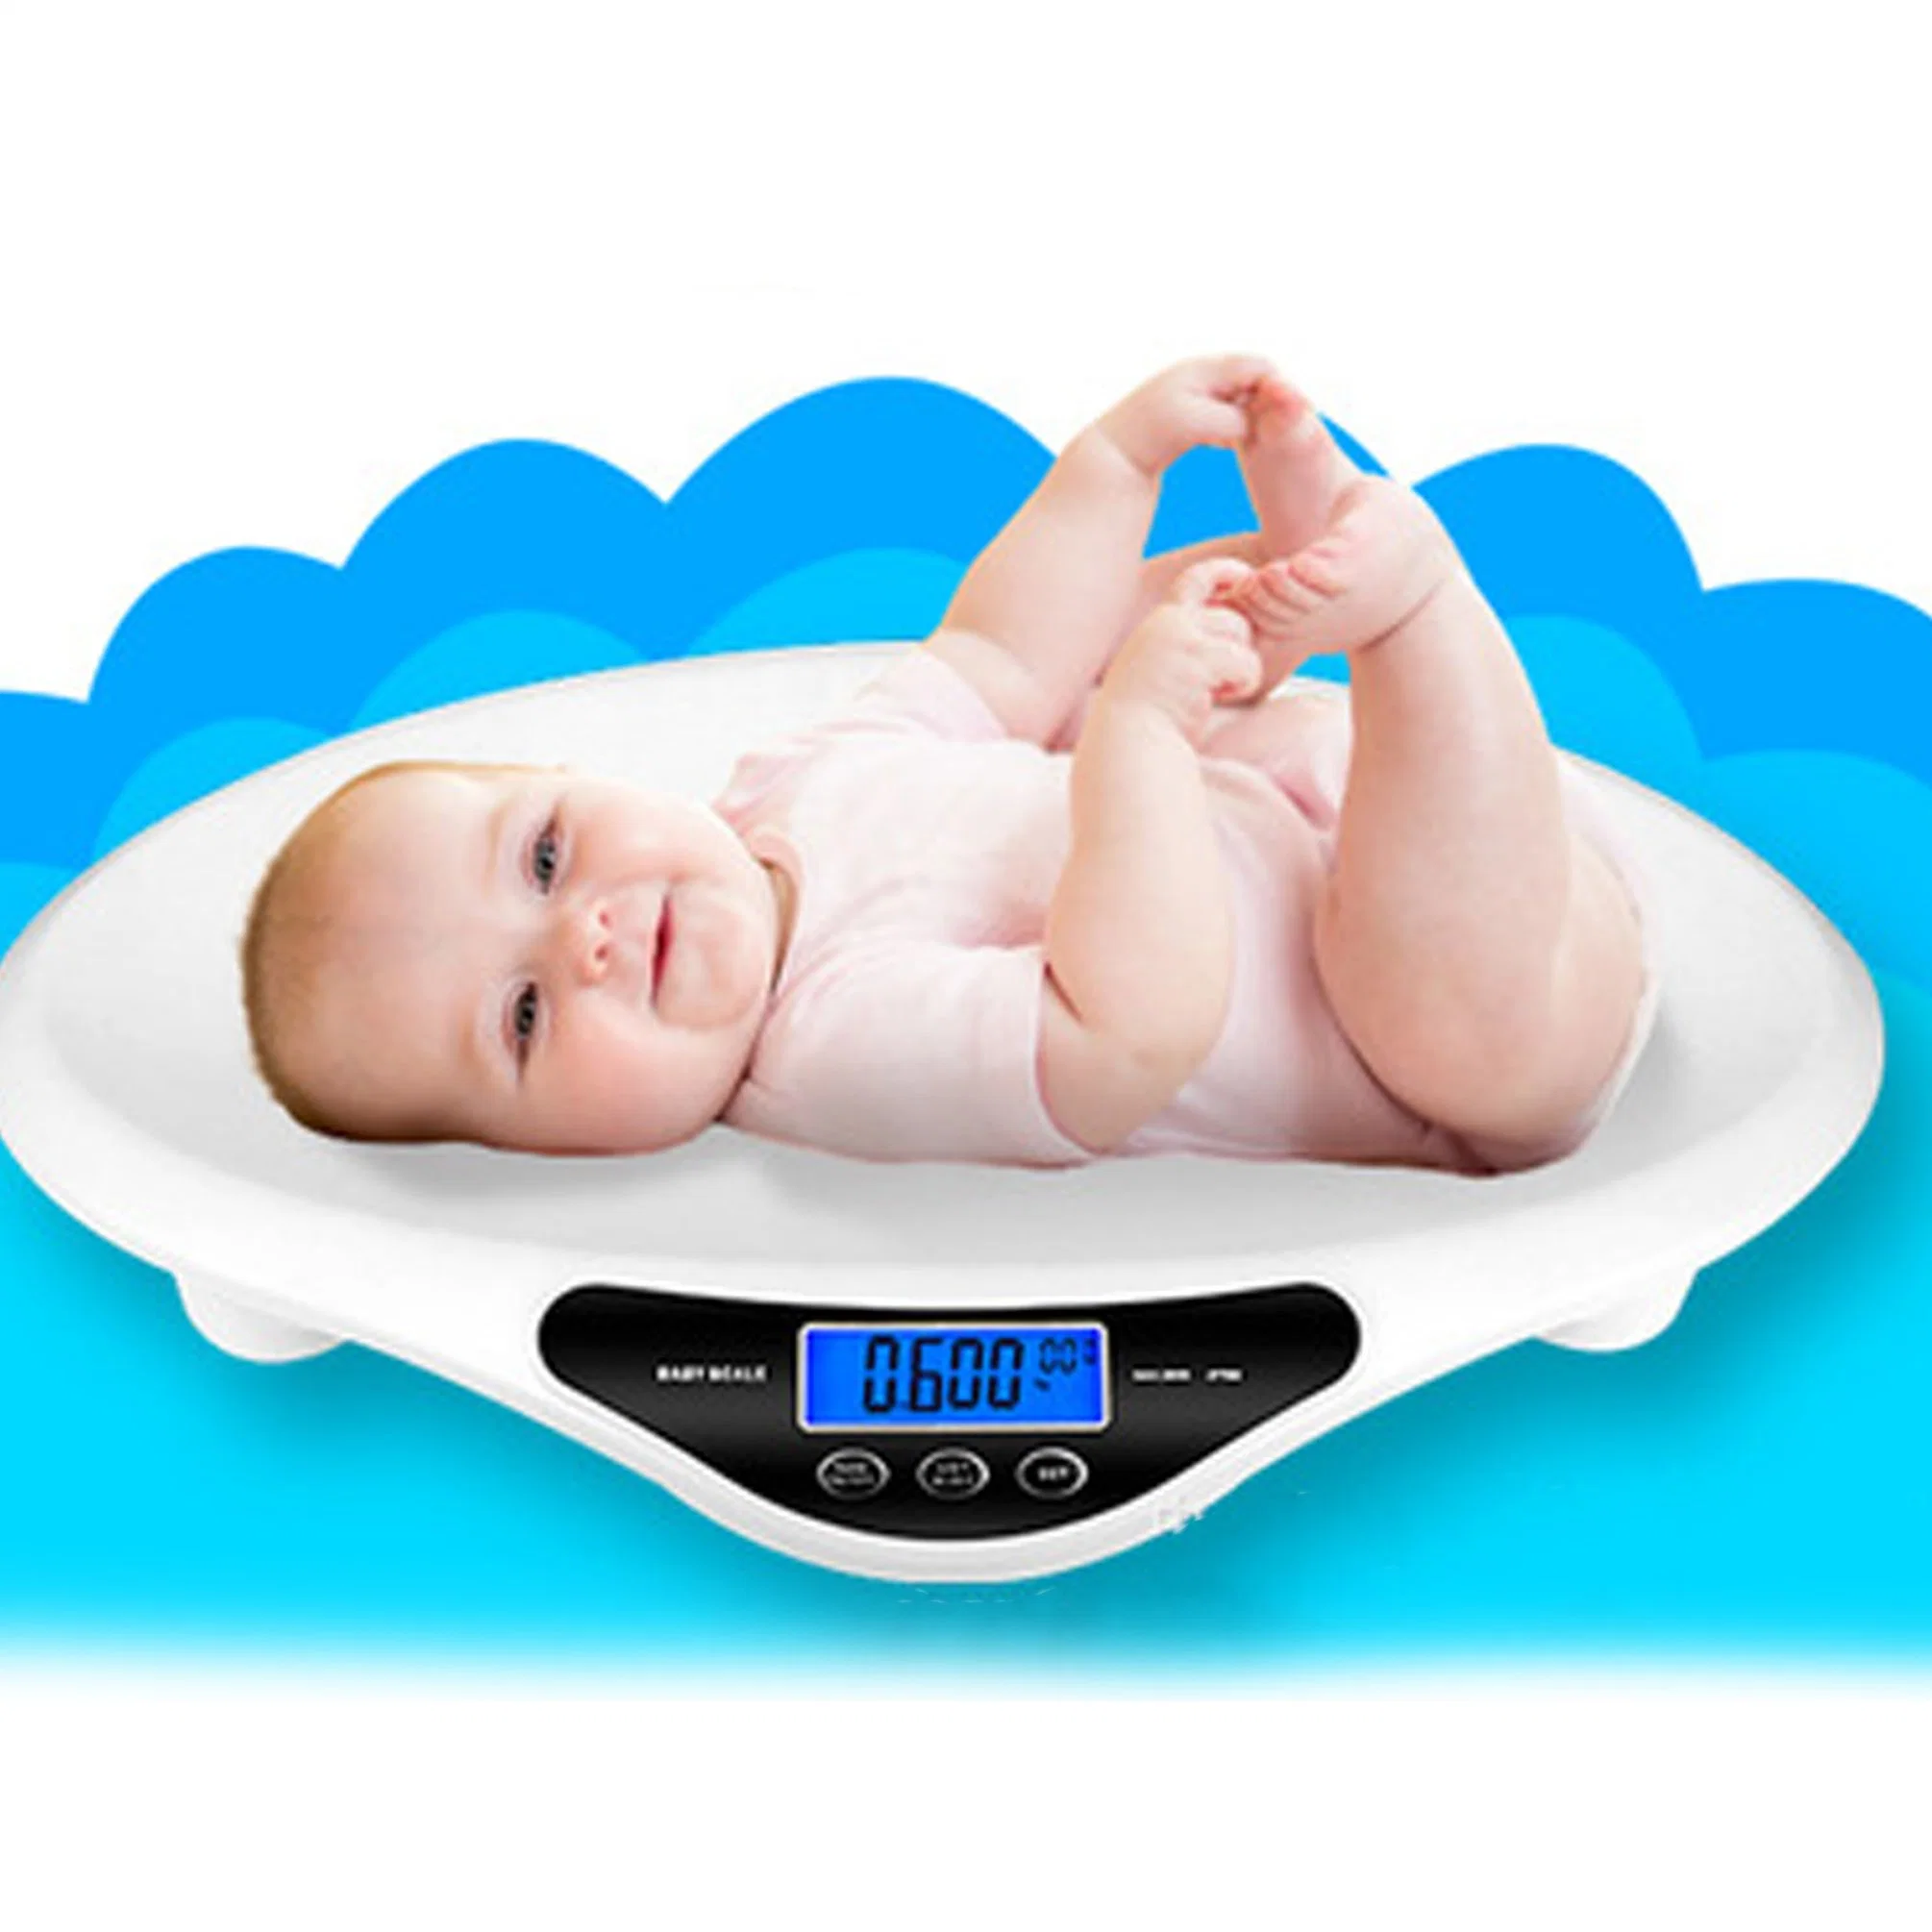 IN-Y101 Smart Unique Cute New Full Electronic Digital Baby Weighing Scale